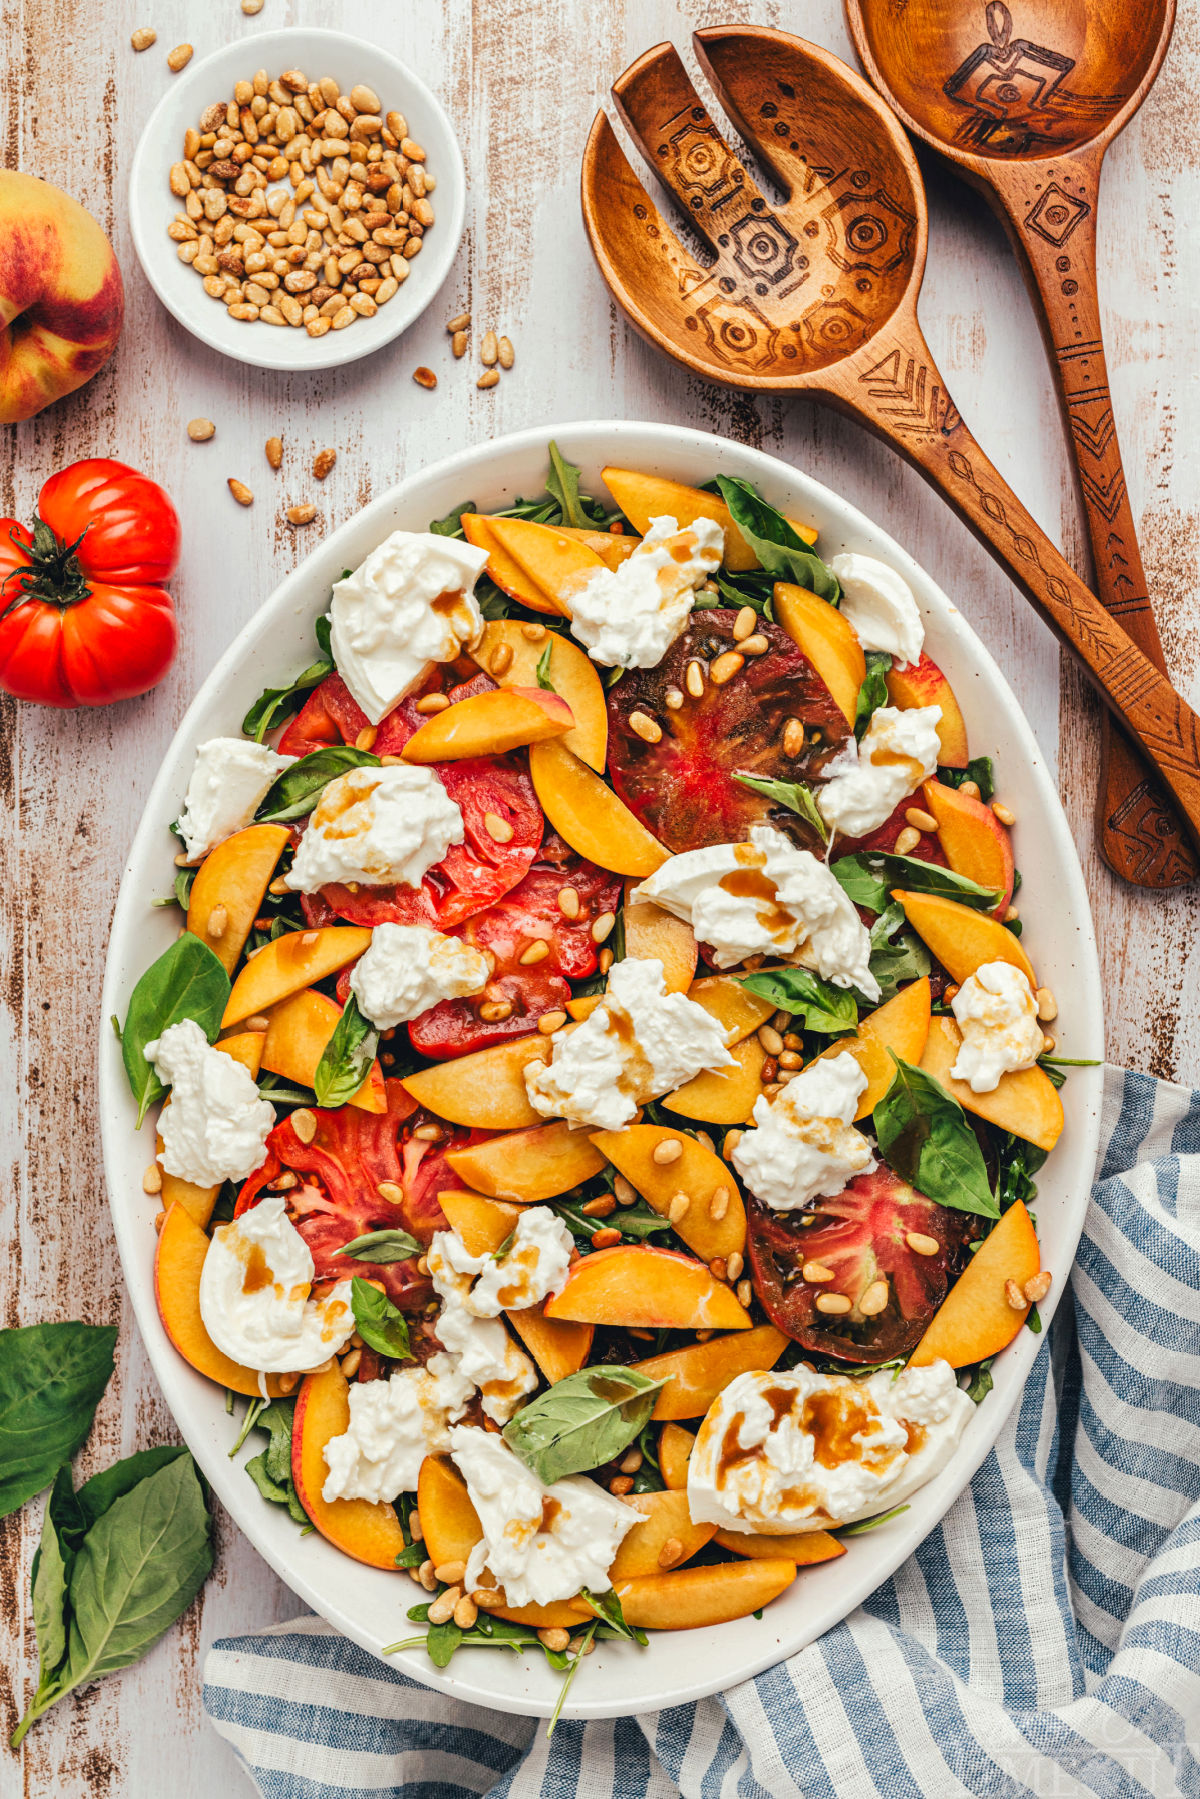 fresh peach salad made with burrata and heirloom tomatoes all topped with a balsamic vinaigrette. Salad is served on a white oval platter and is topped with pine nuts.